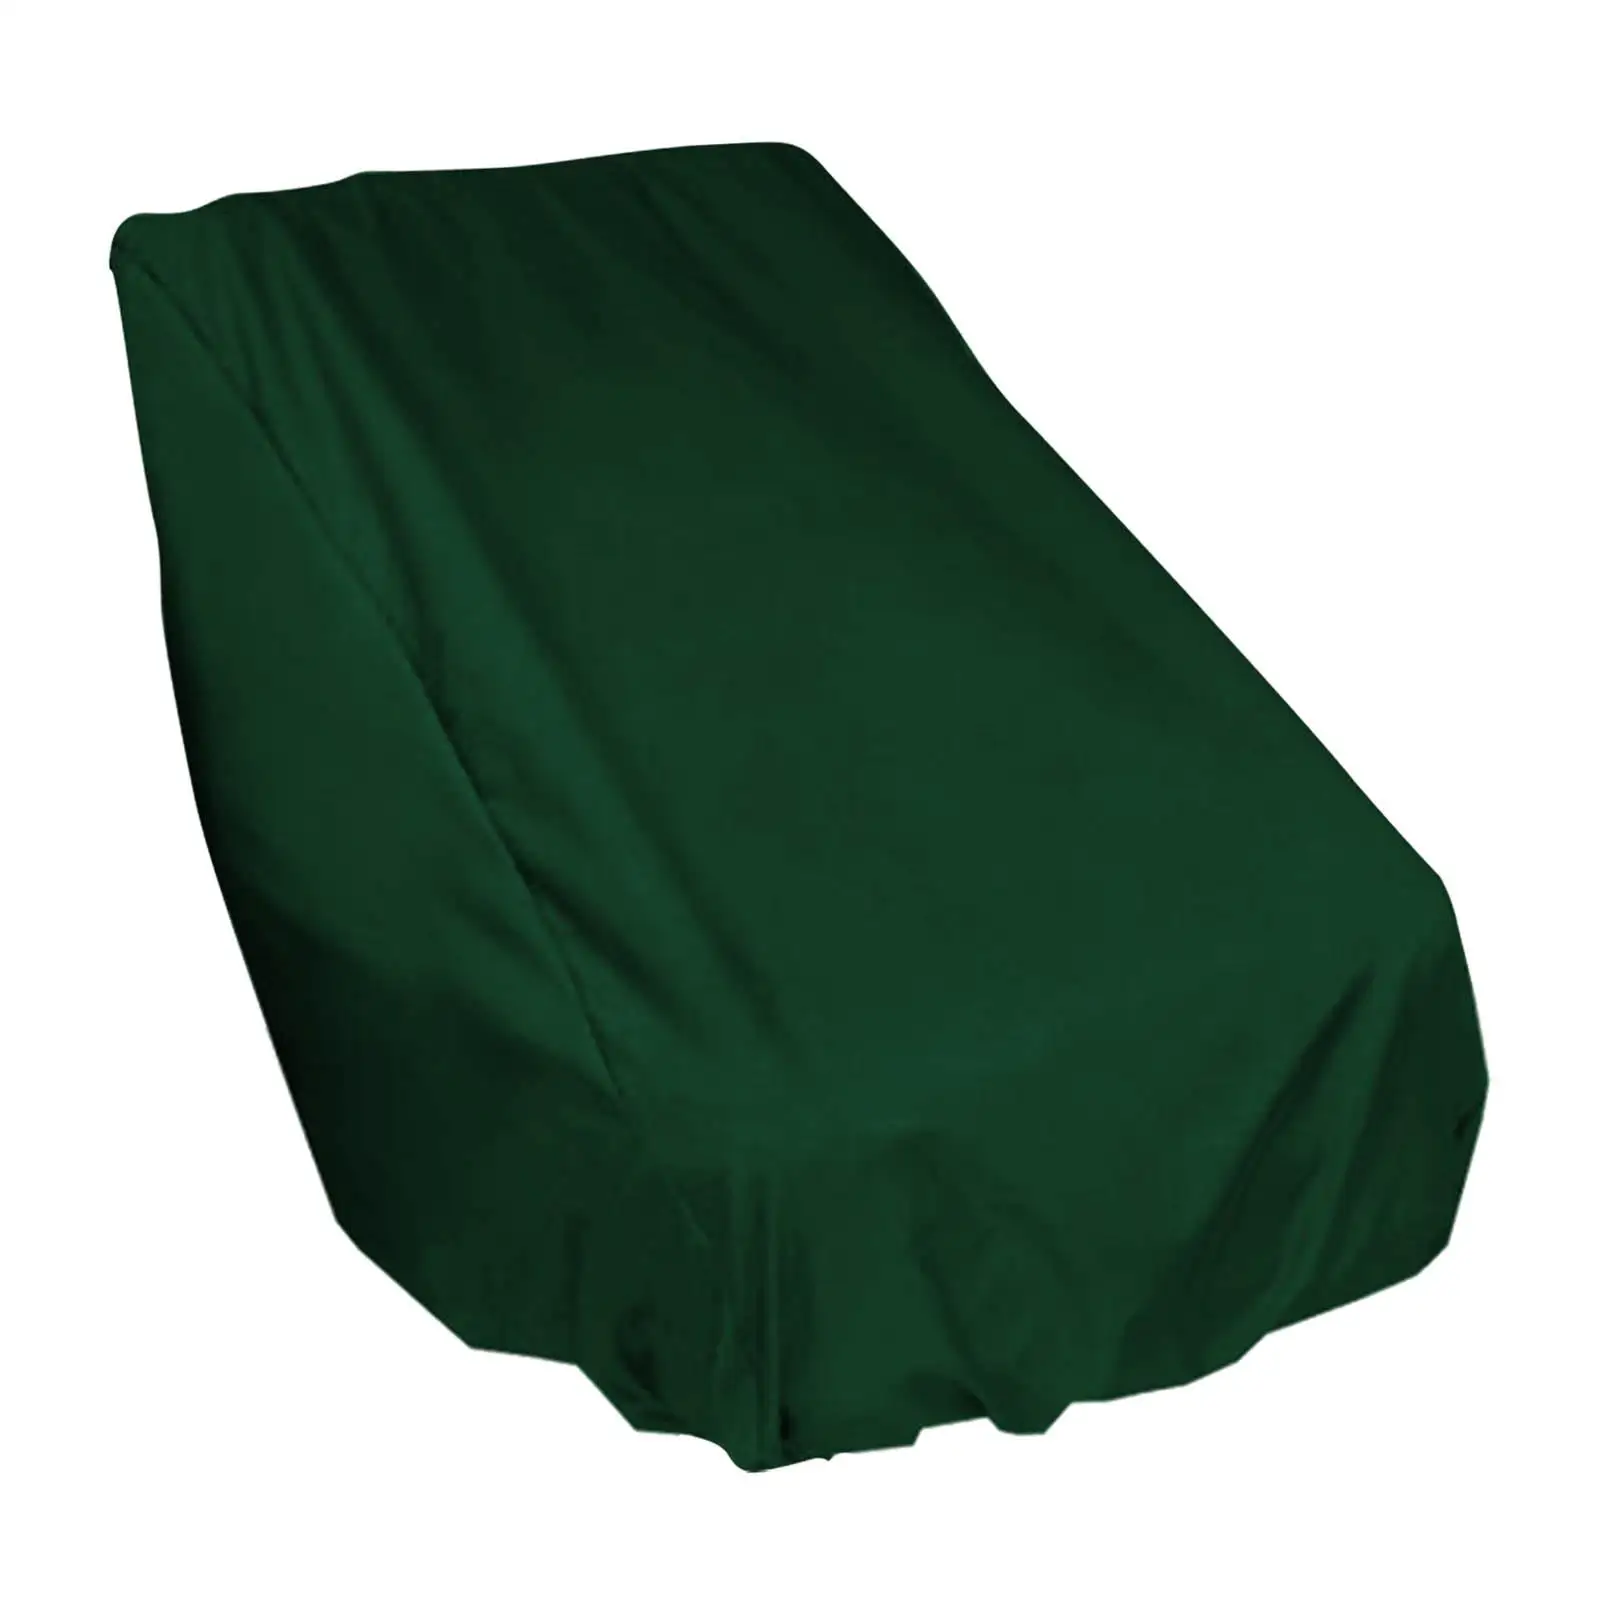 Marine canvas boat seat covers, weather resistant fabric protects the captain`s